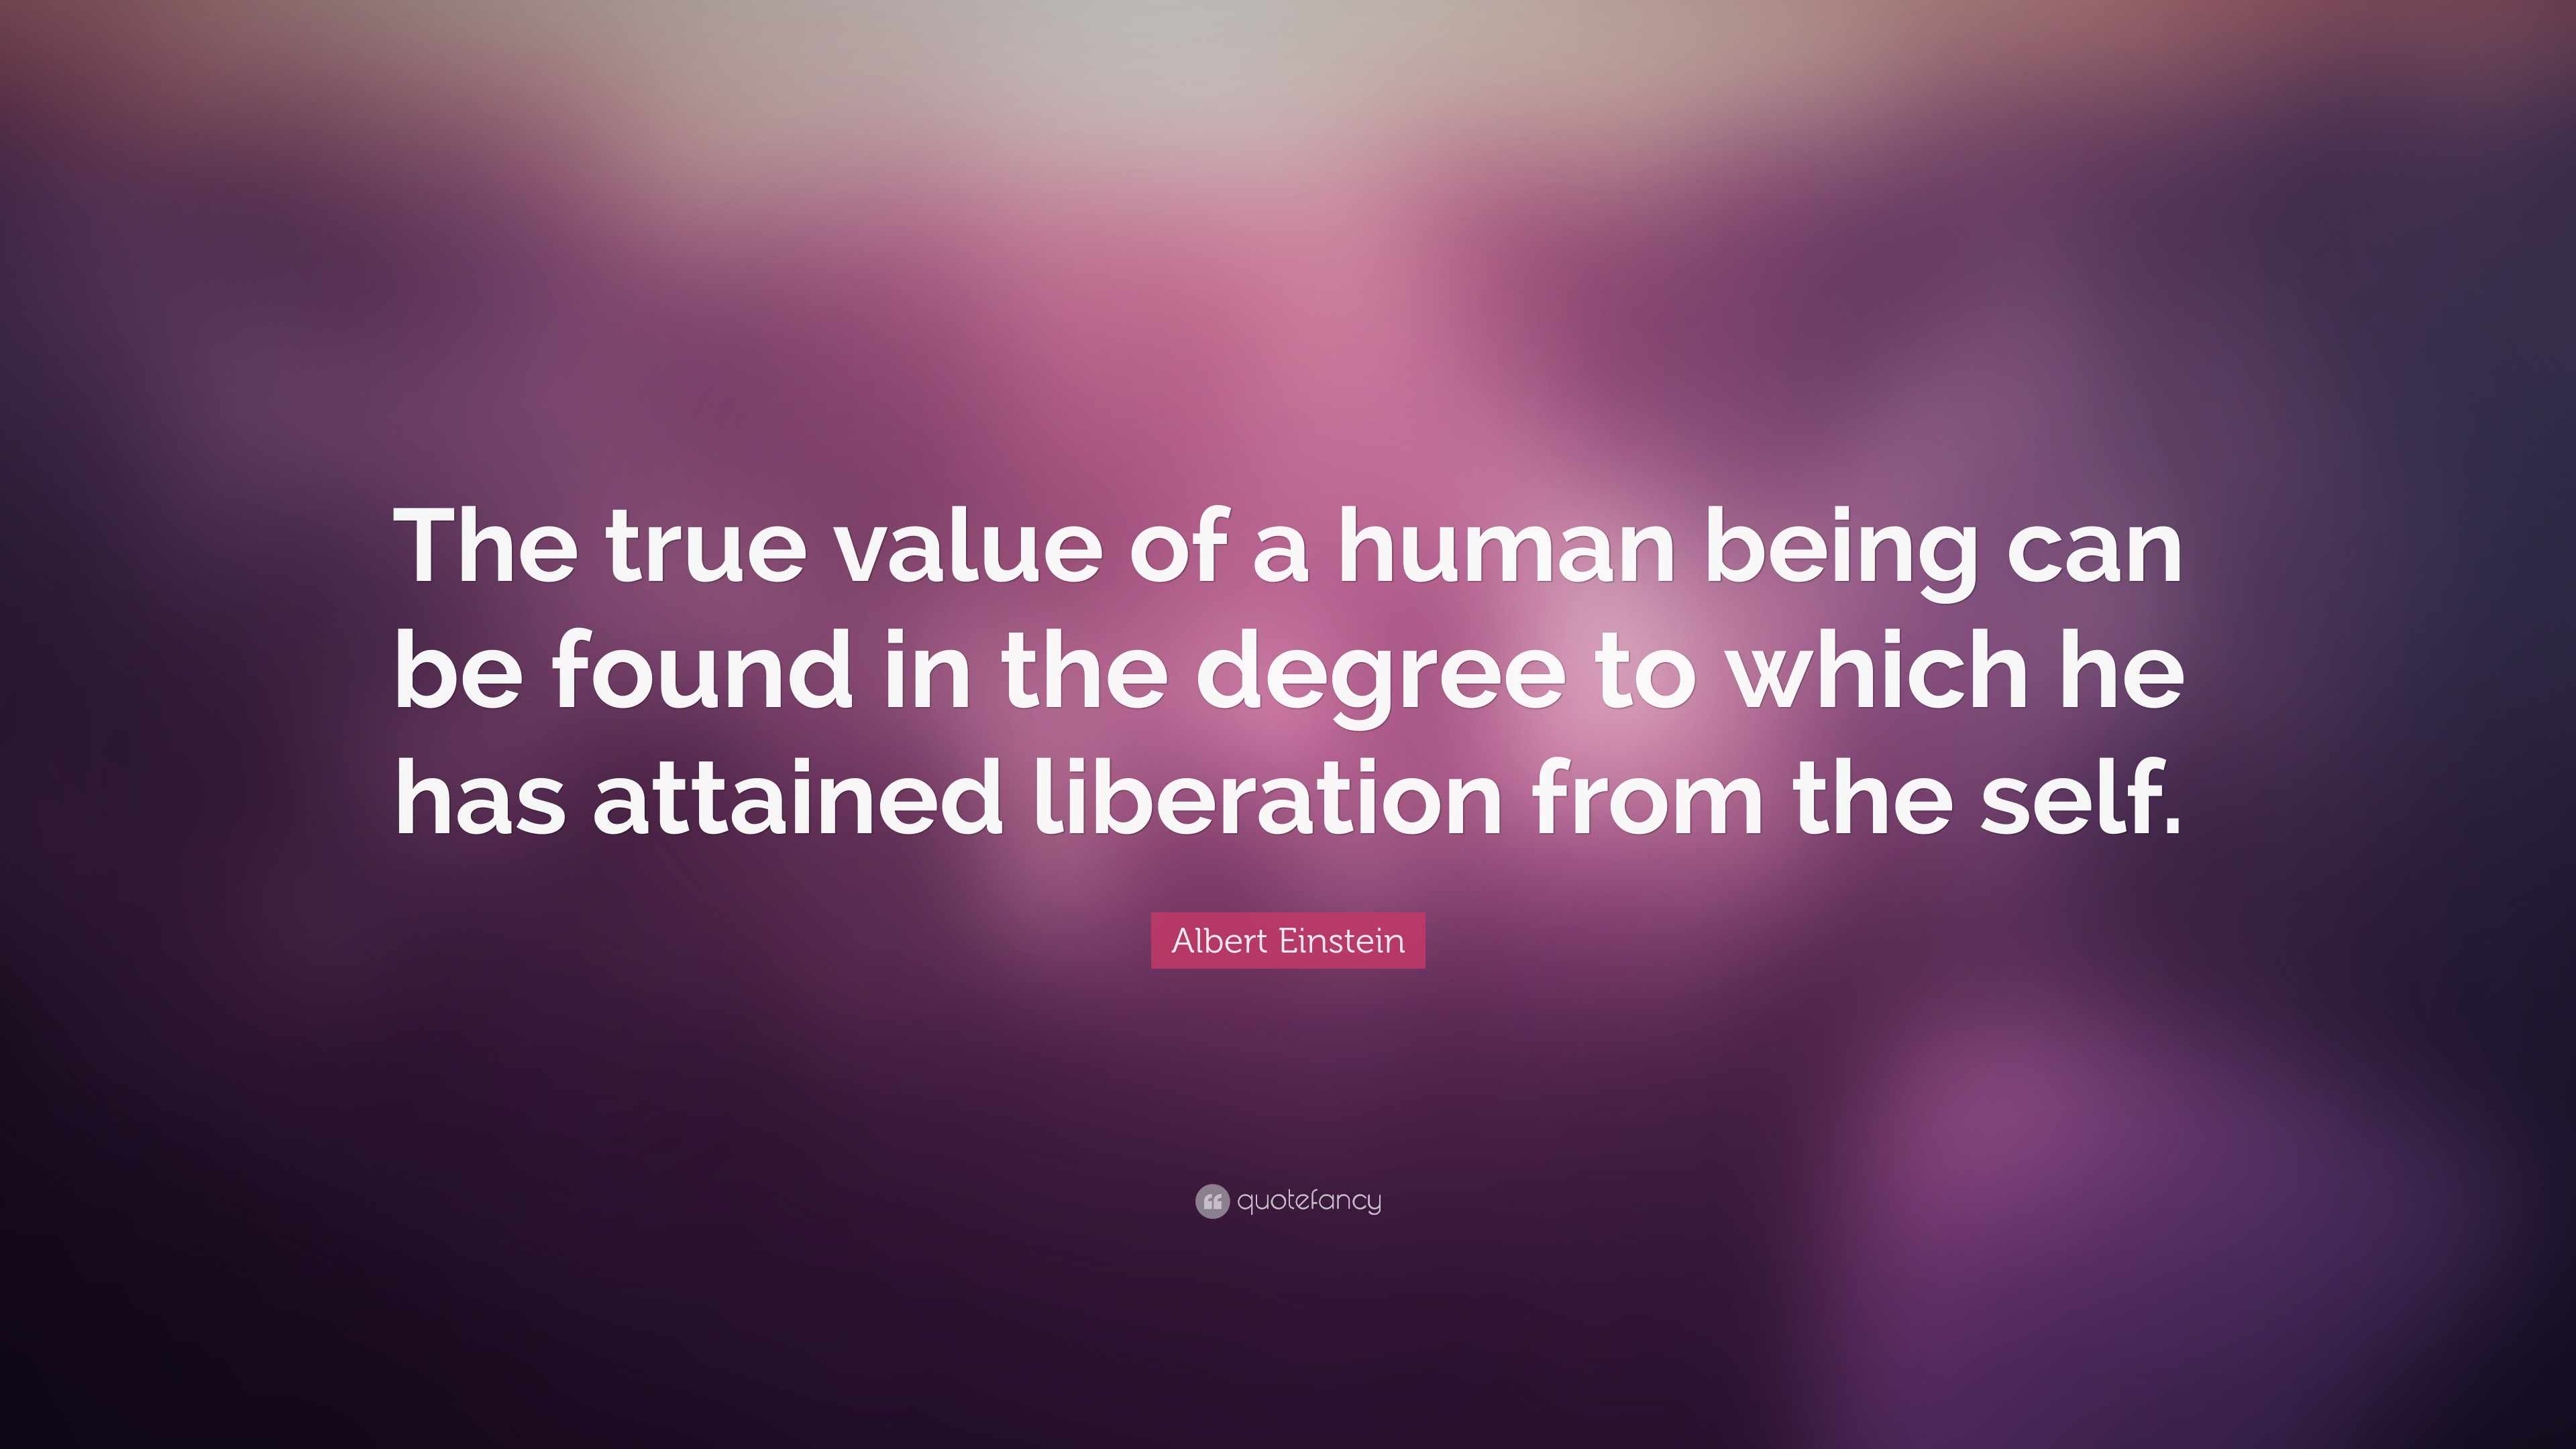 Albert Einstein Quote: “The true value of a human being can be found in ...